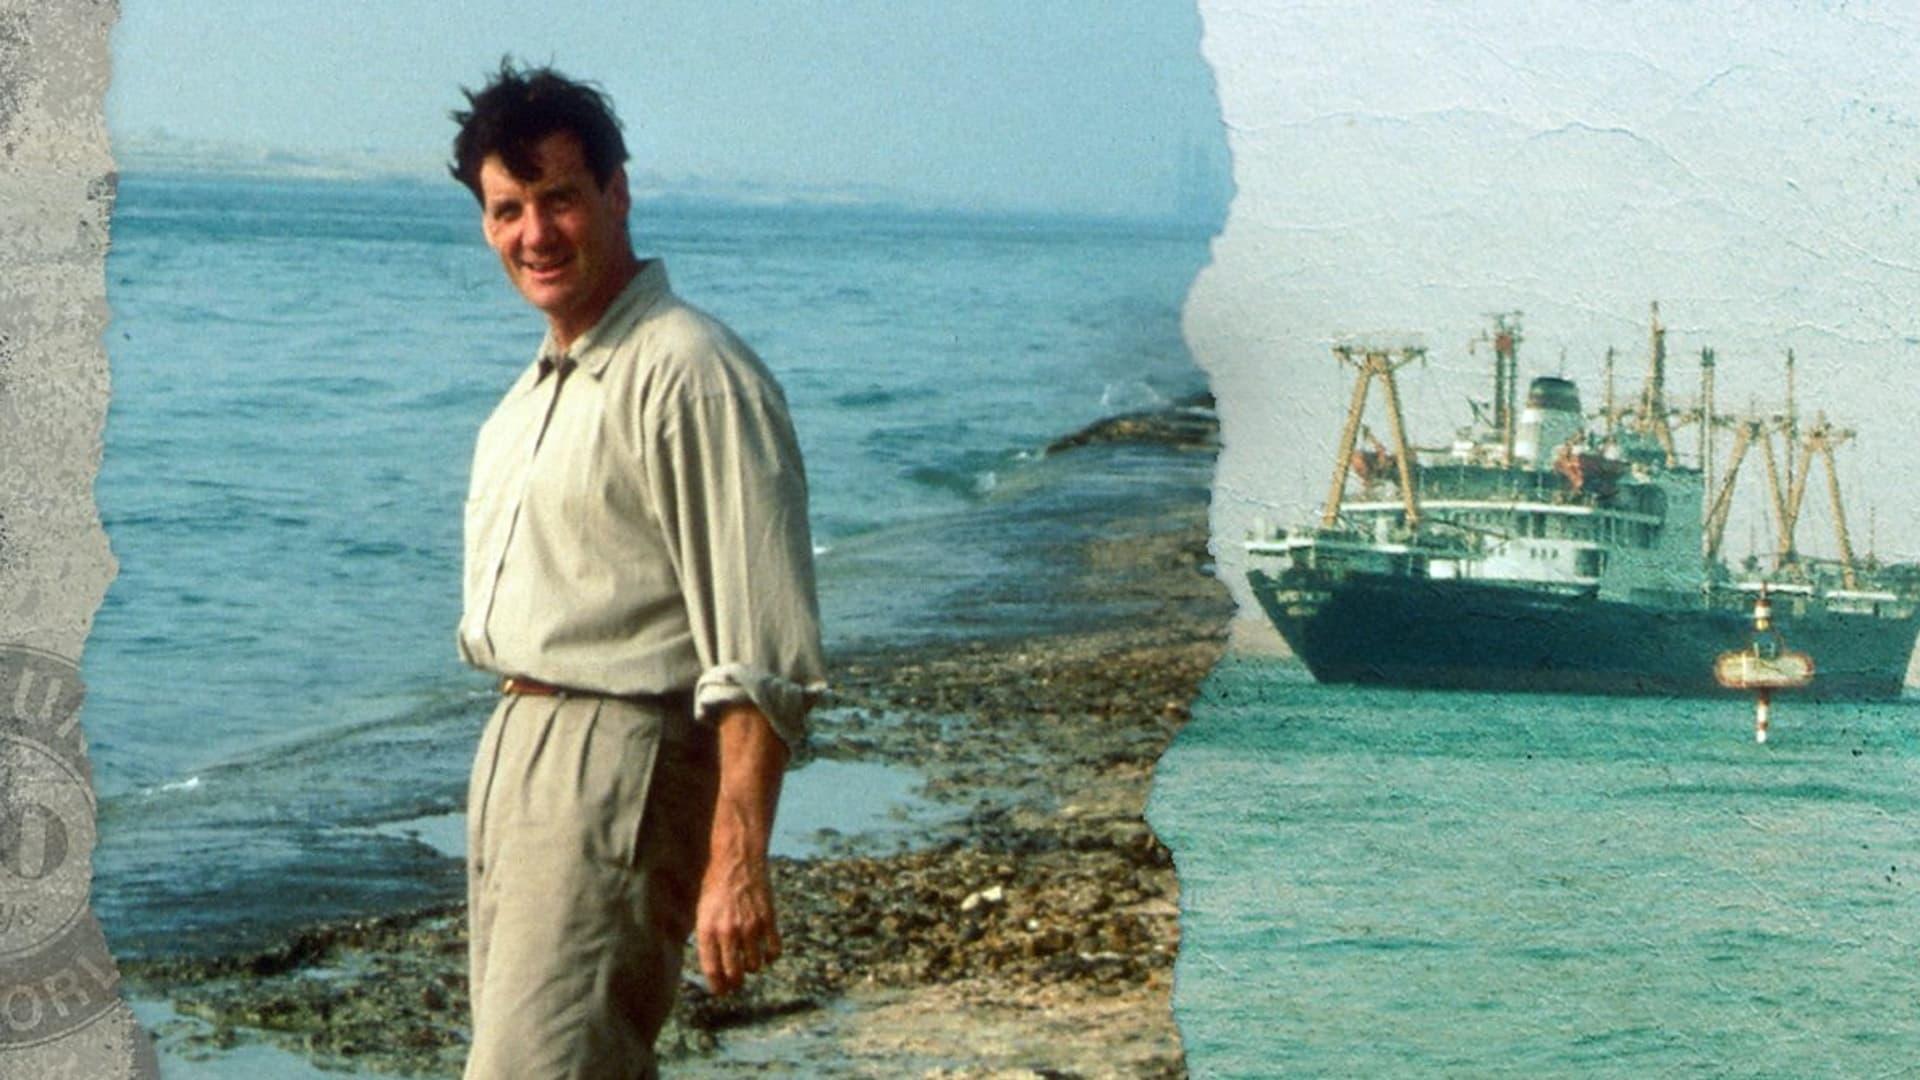 Michael Palin: Around the World in 80 Days backdrop